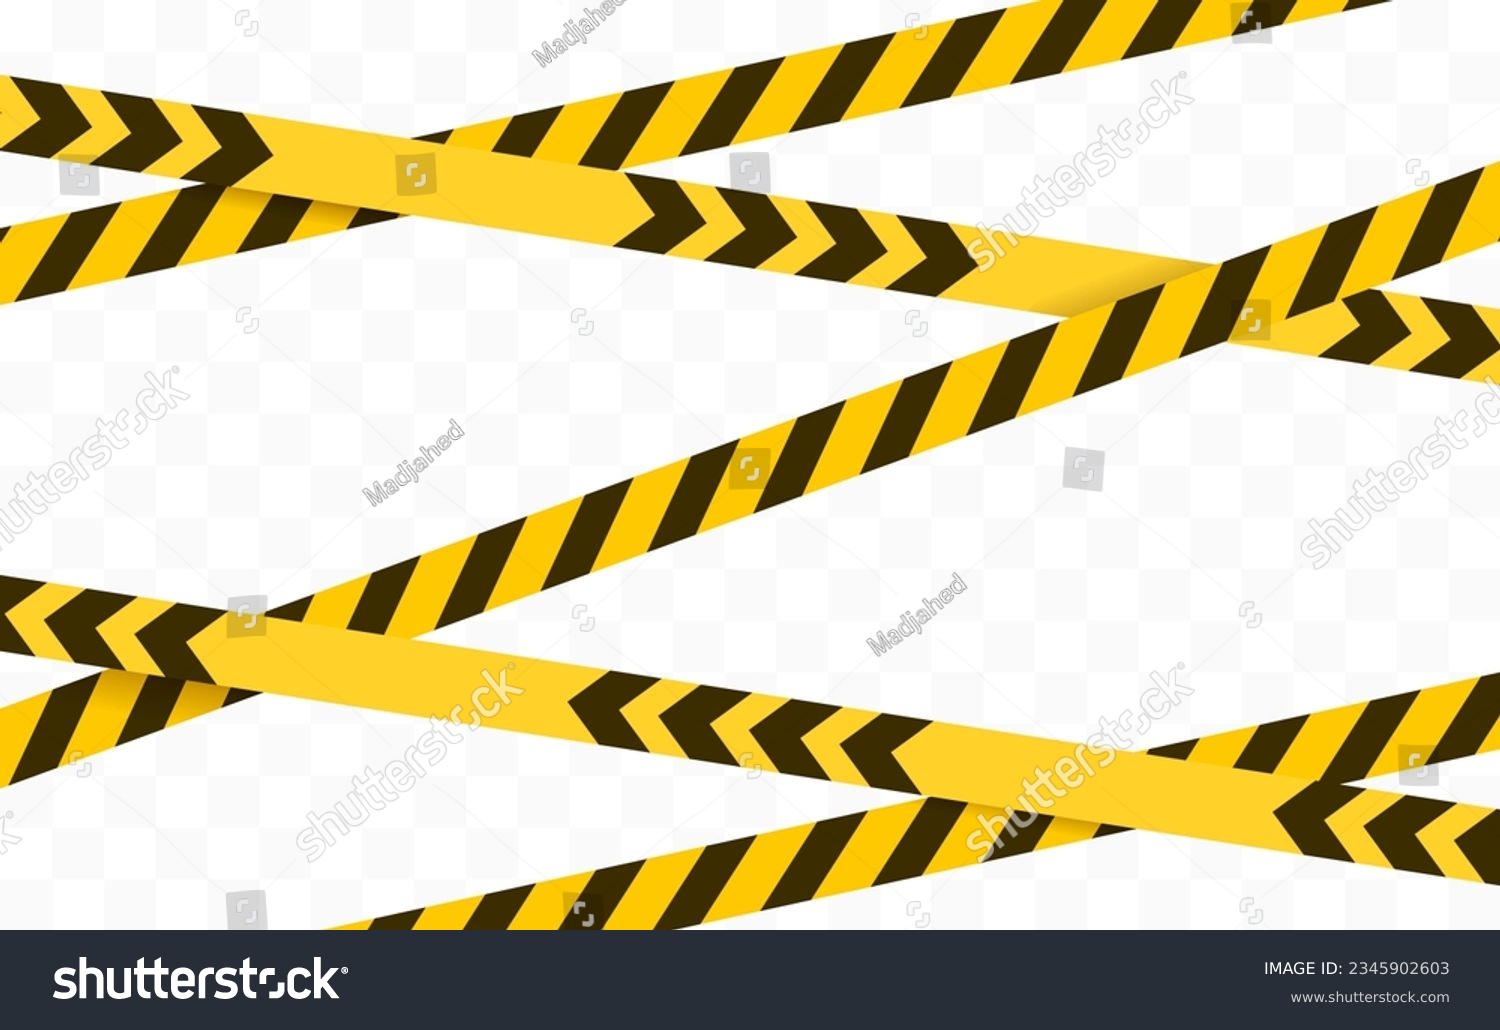 SVG of Caution tape illustration isolated. Vector yellow danger lines svg